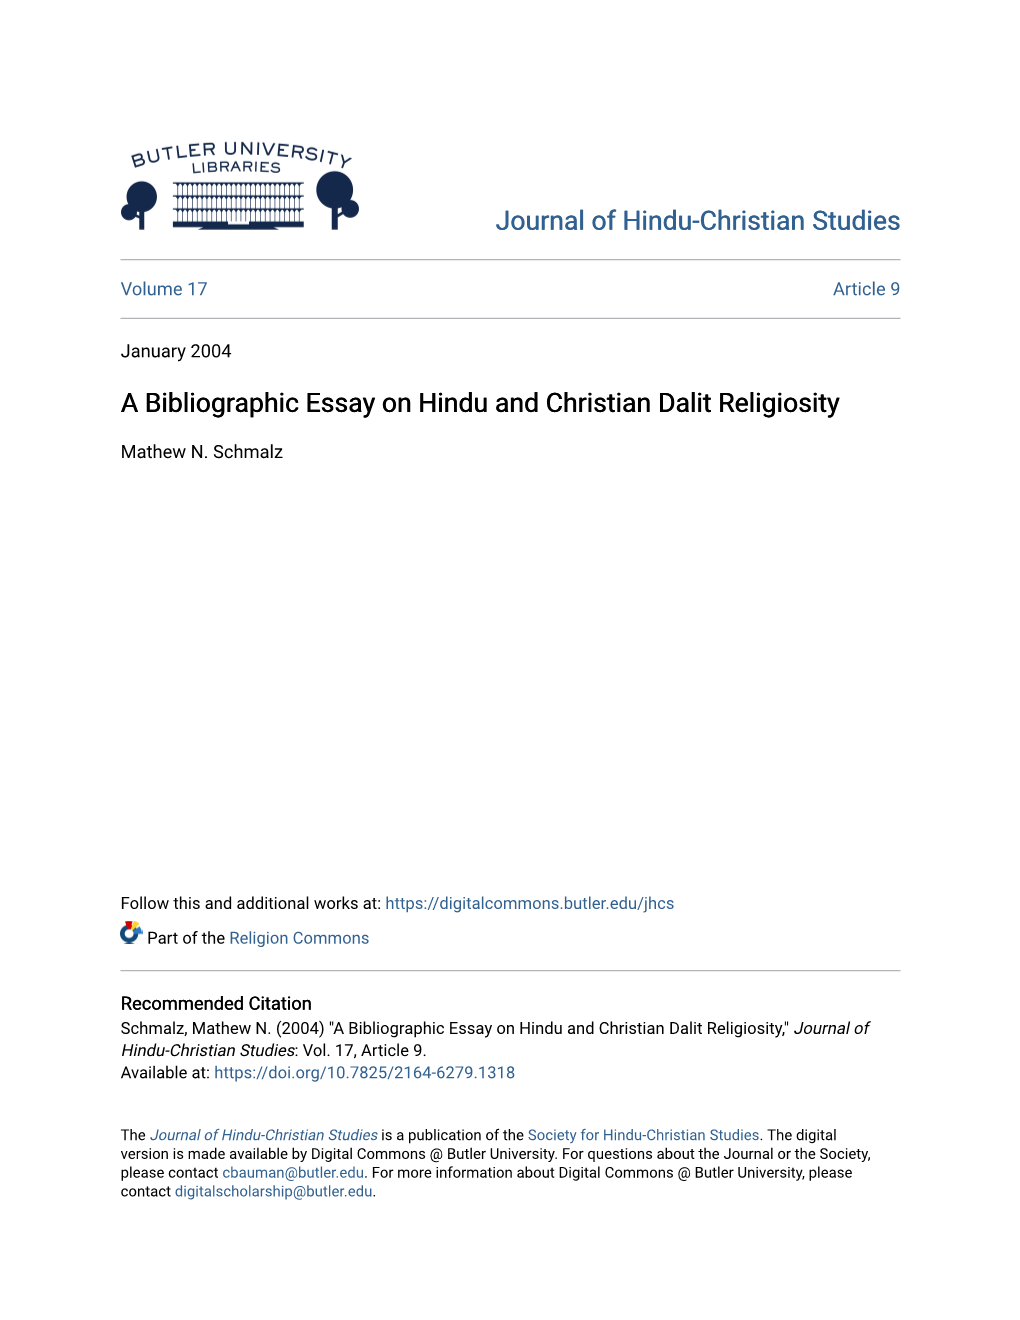 A Bibliographic Essay on Hindu and Christian Dalit Religiosity